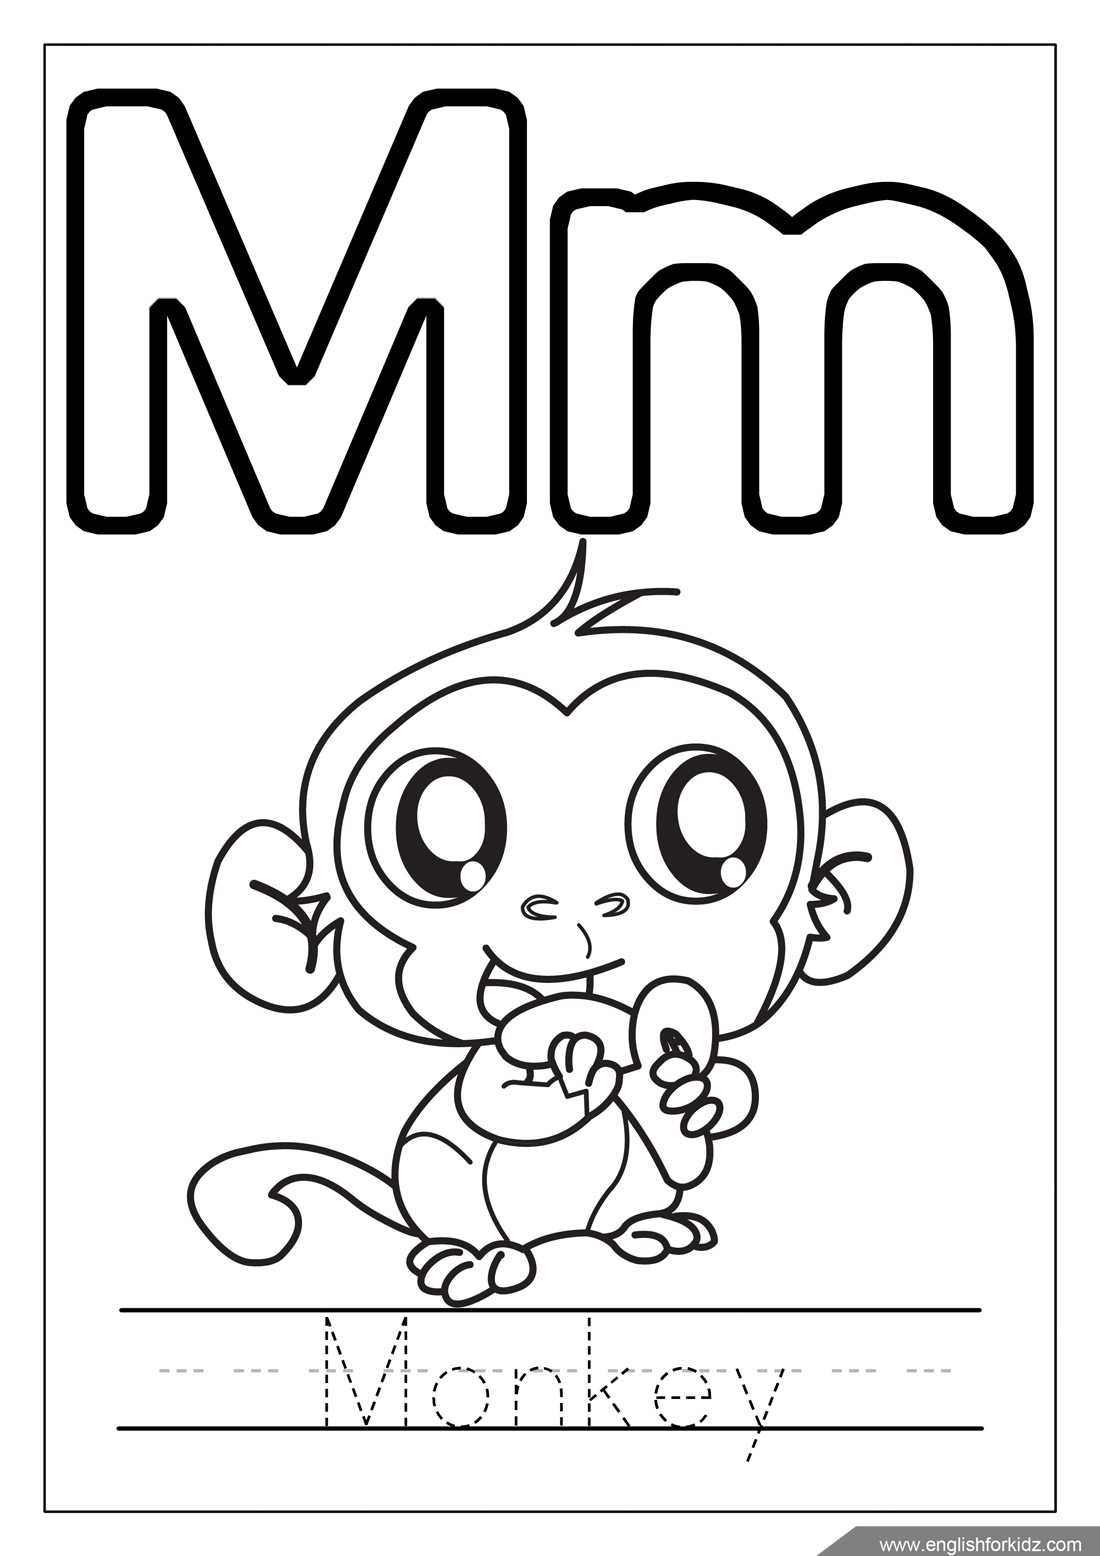 Download English for Kids Step by Step: Alphabet Coloring Pages ...